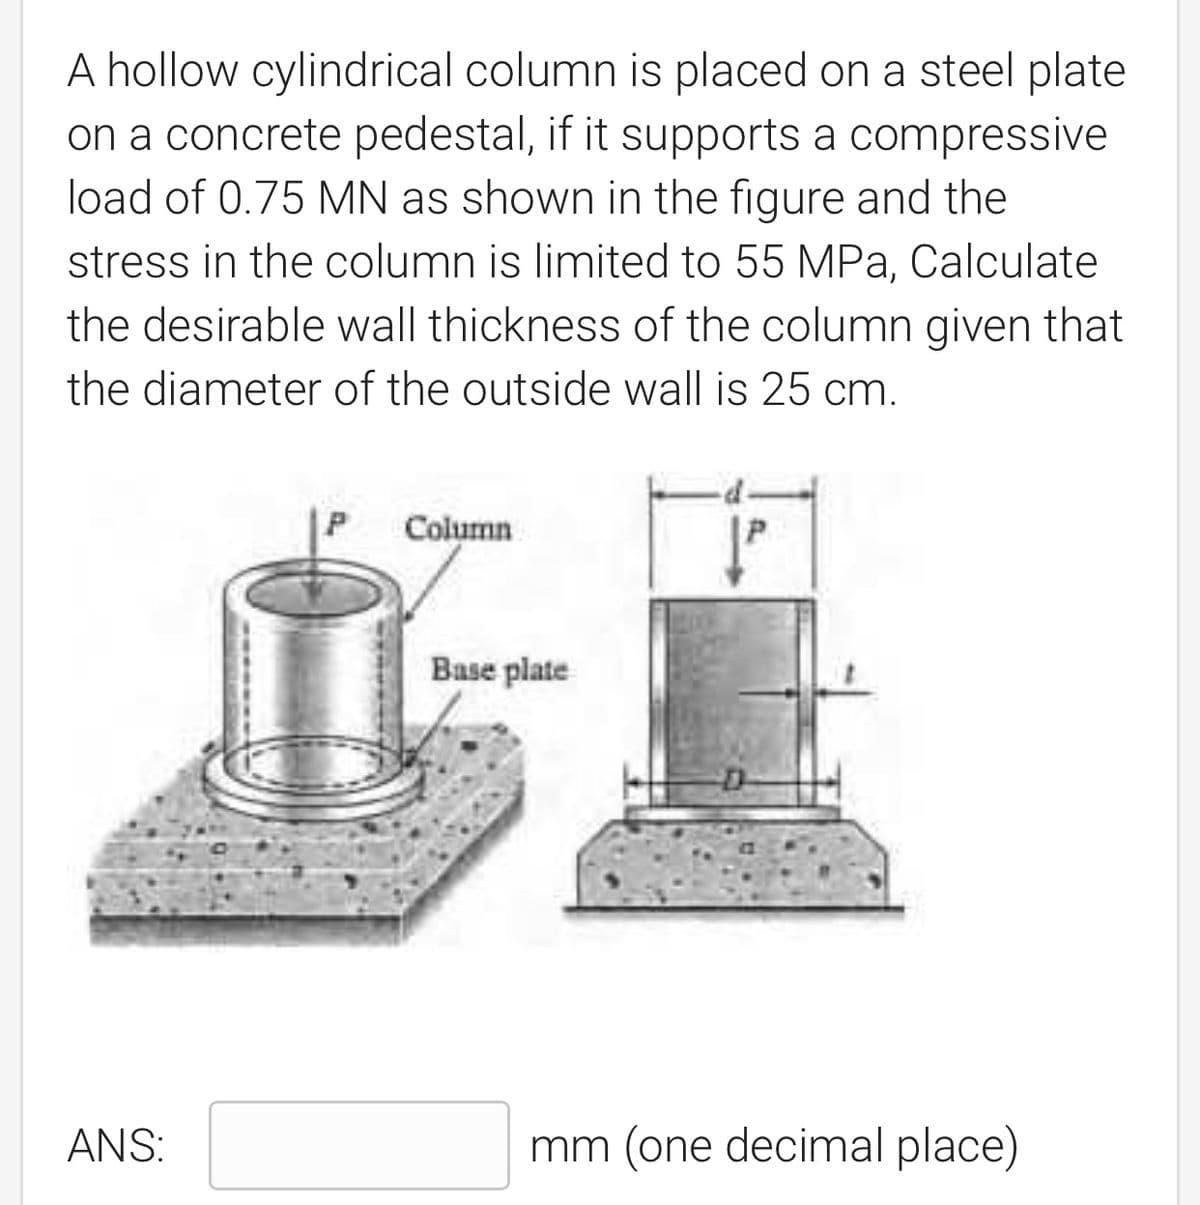 A hollow cylindrical column is placed on a steel plate
on a concrete pedestal, if it supports a compressive
load of 0.75 MN as shown in the figure and the
stress in the column is limited to 55 MPa, Calculate
the desirable wall thickness of the column given that
the diameter of the outside wall is 25 cm.
Column
ANS:
Base plate
mm (one decimal place)